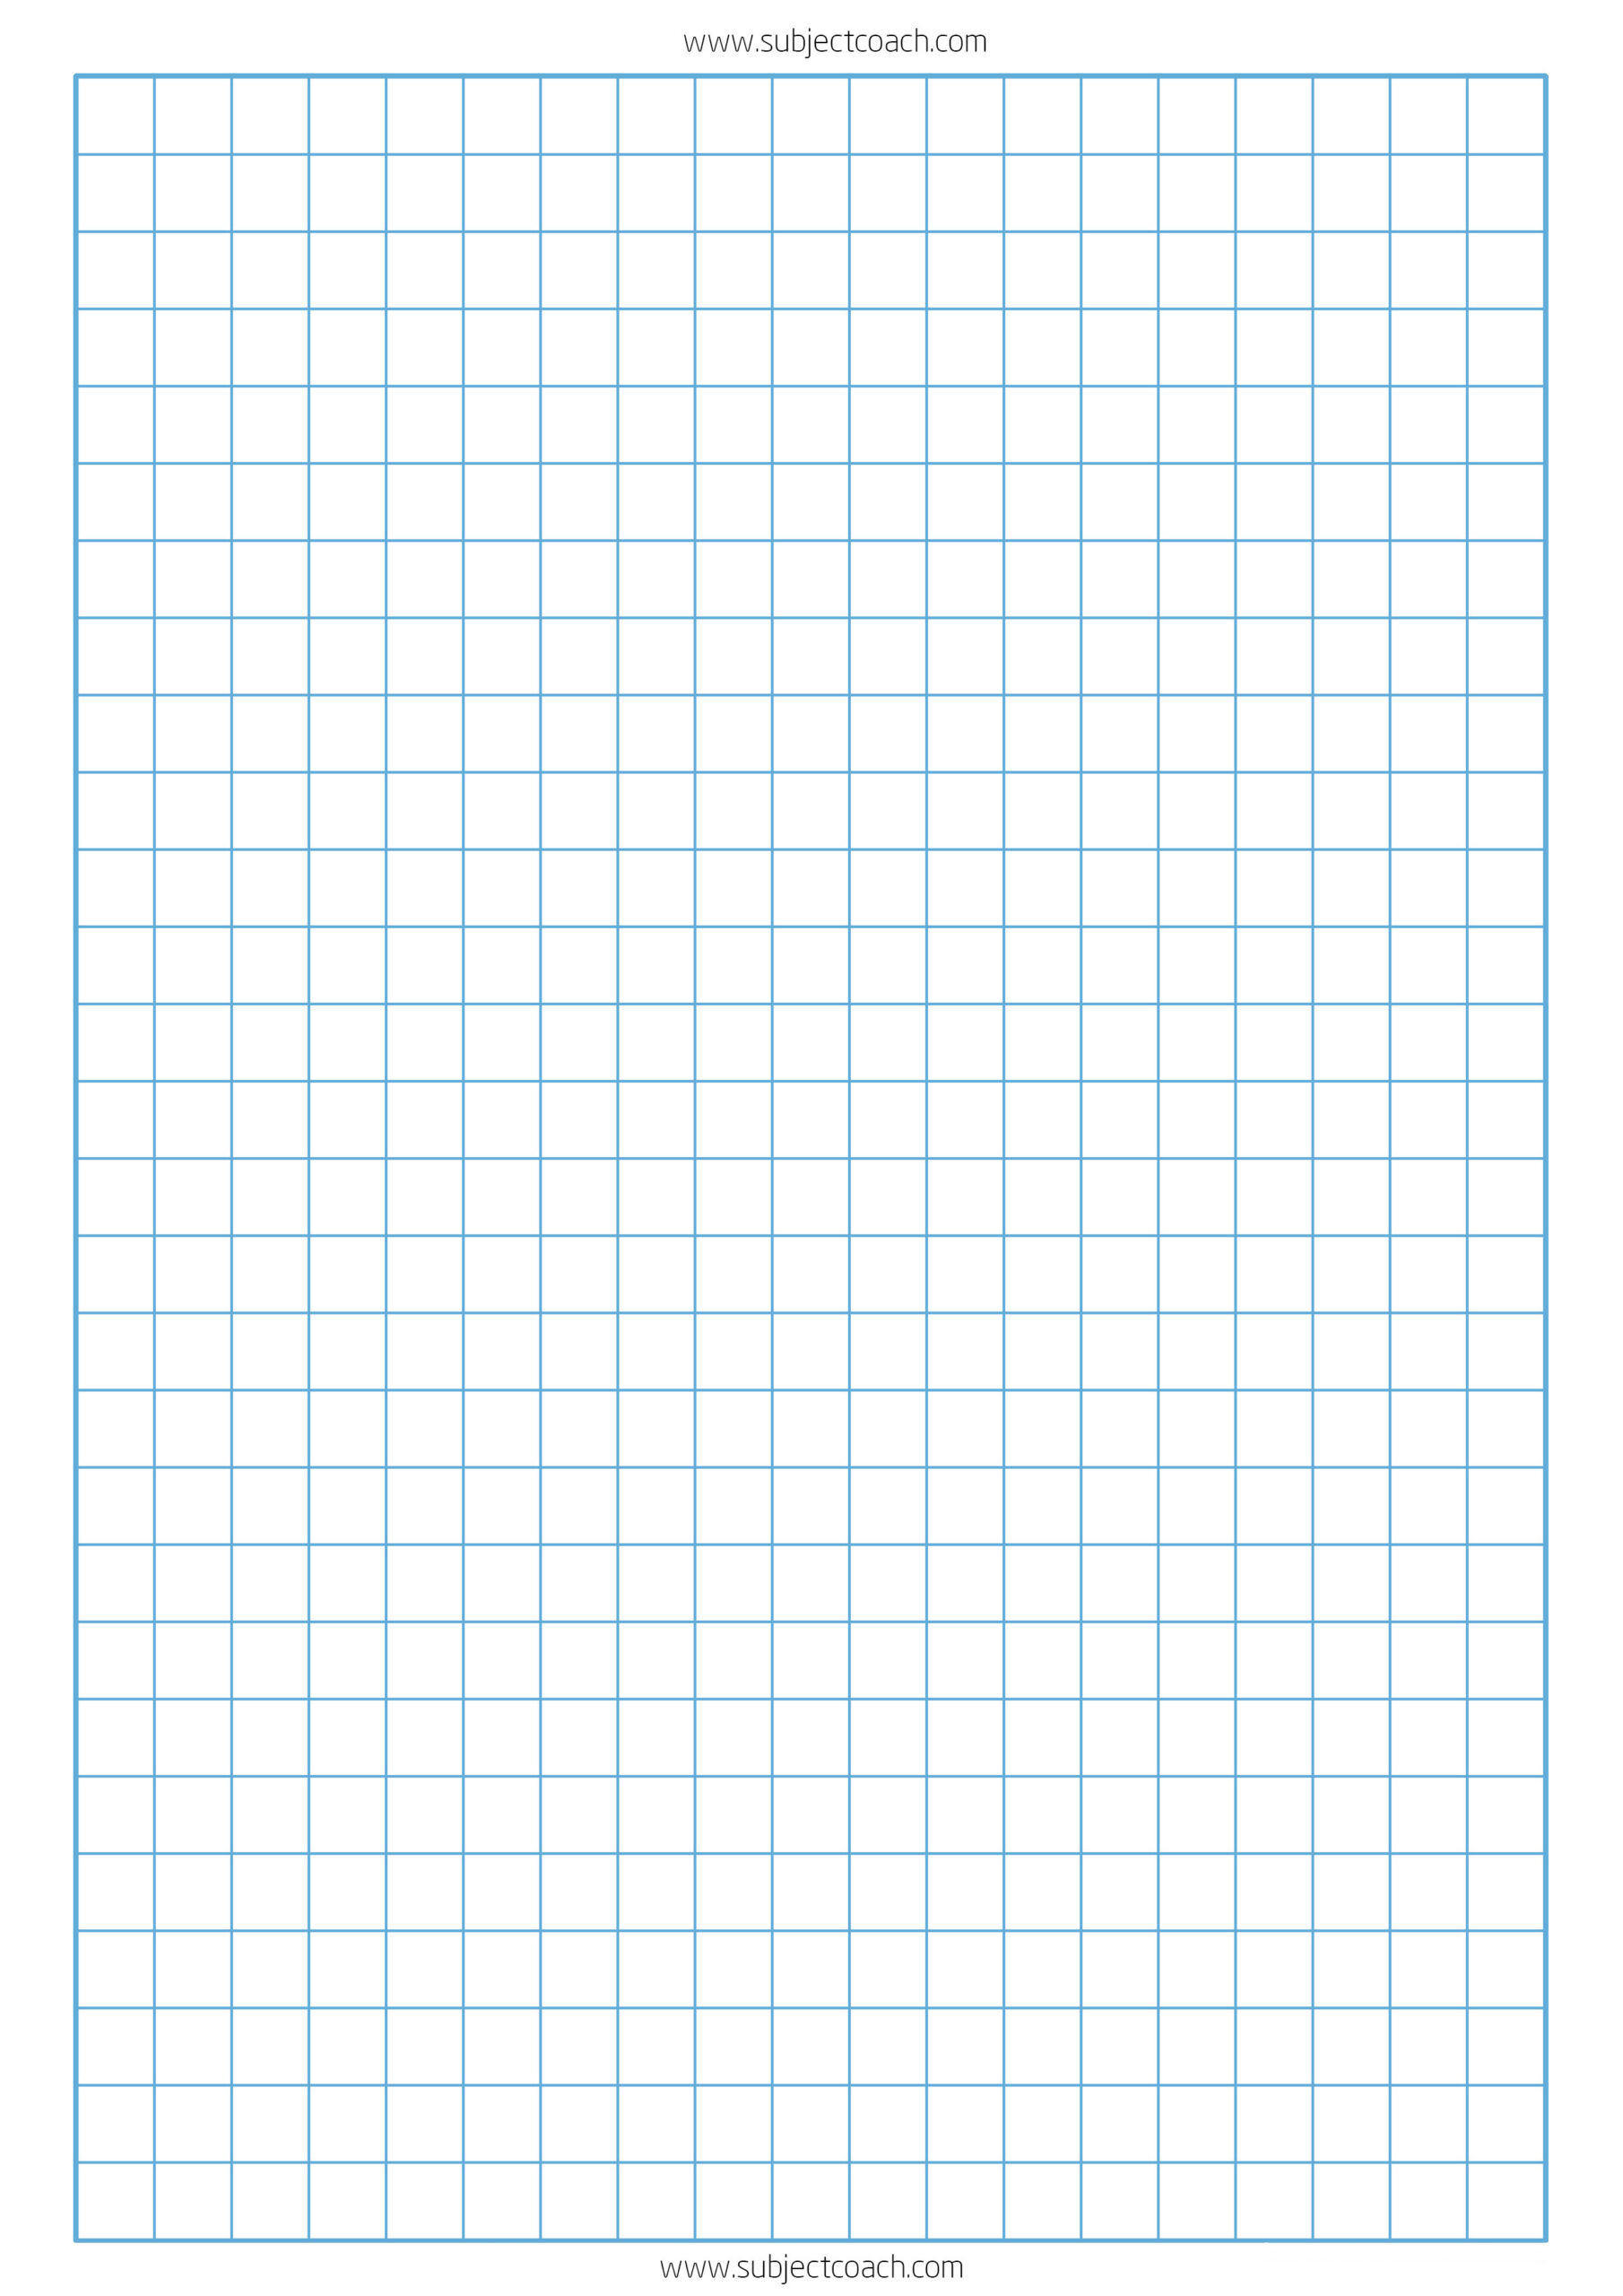 Free Printable Graph Paper 1Cm For A4 Paper | Subjectcoach with regard to Cm Graph Paper Free Printable